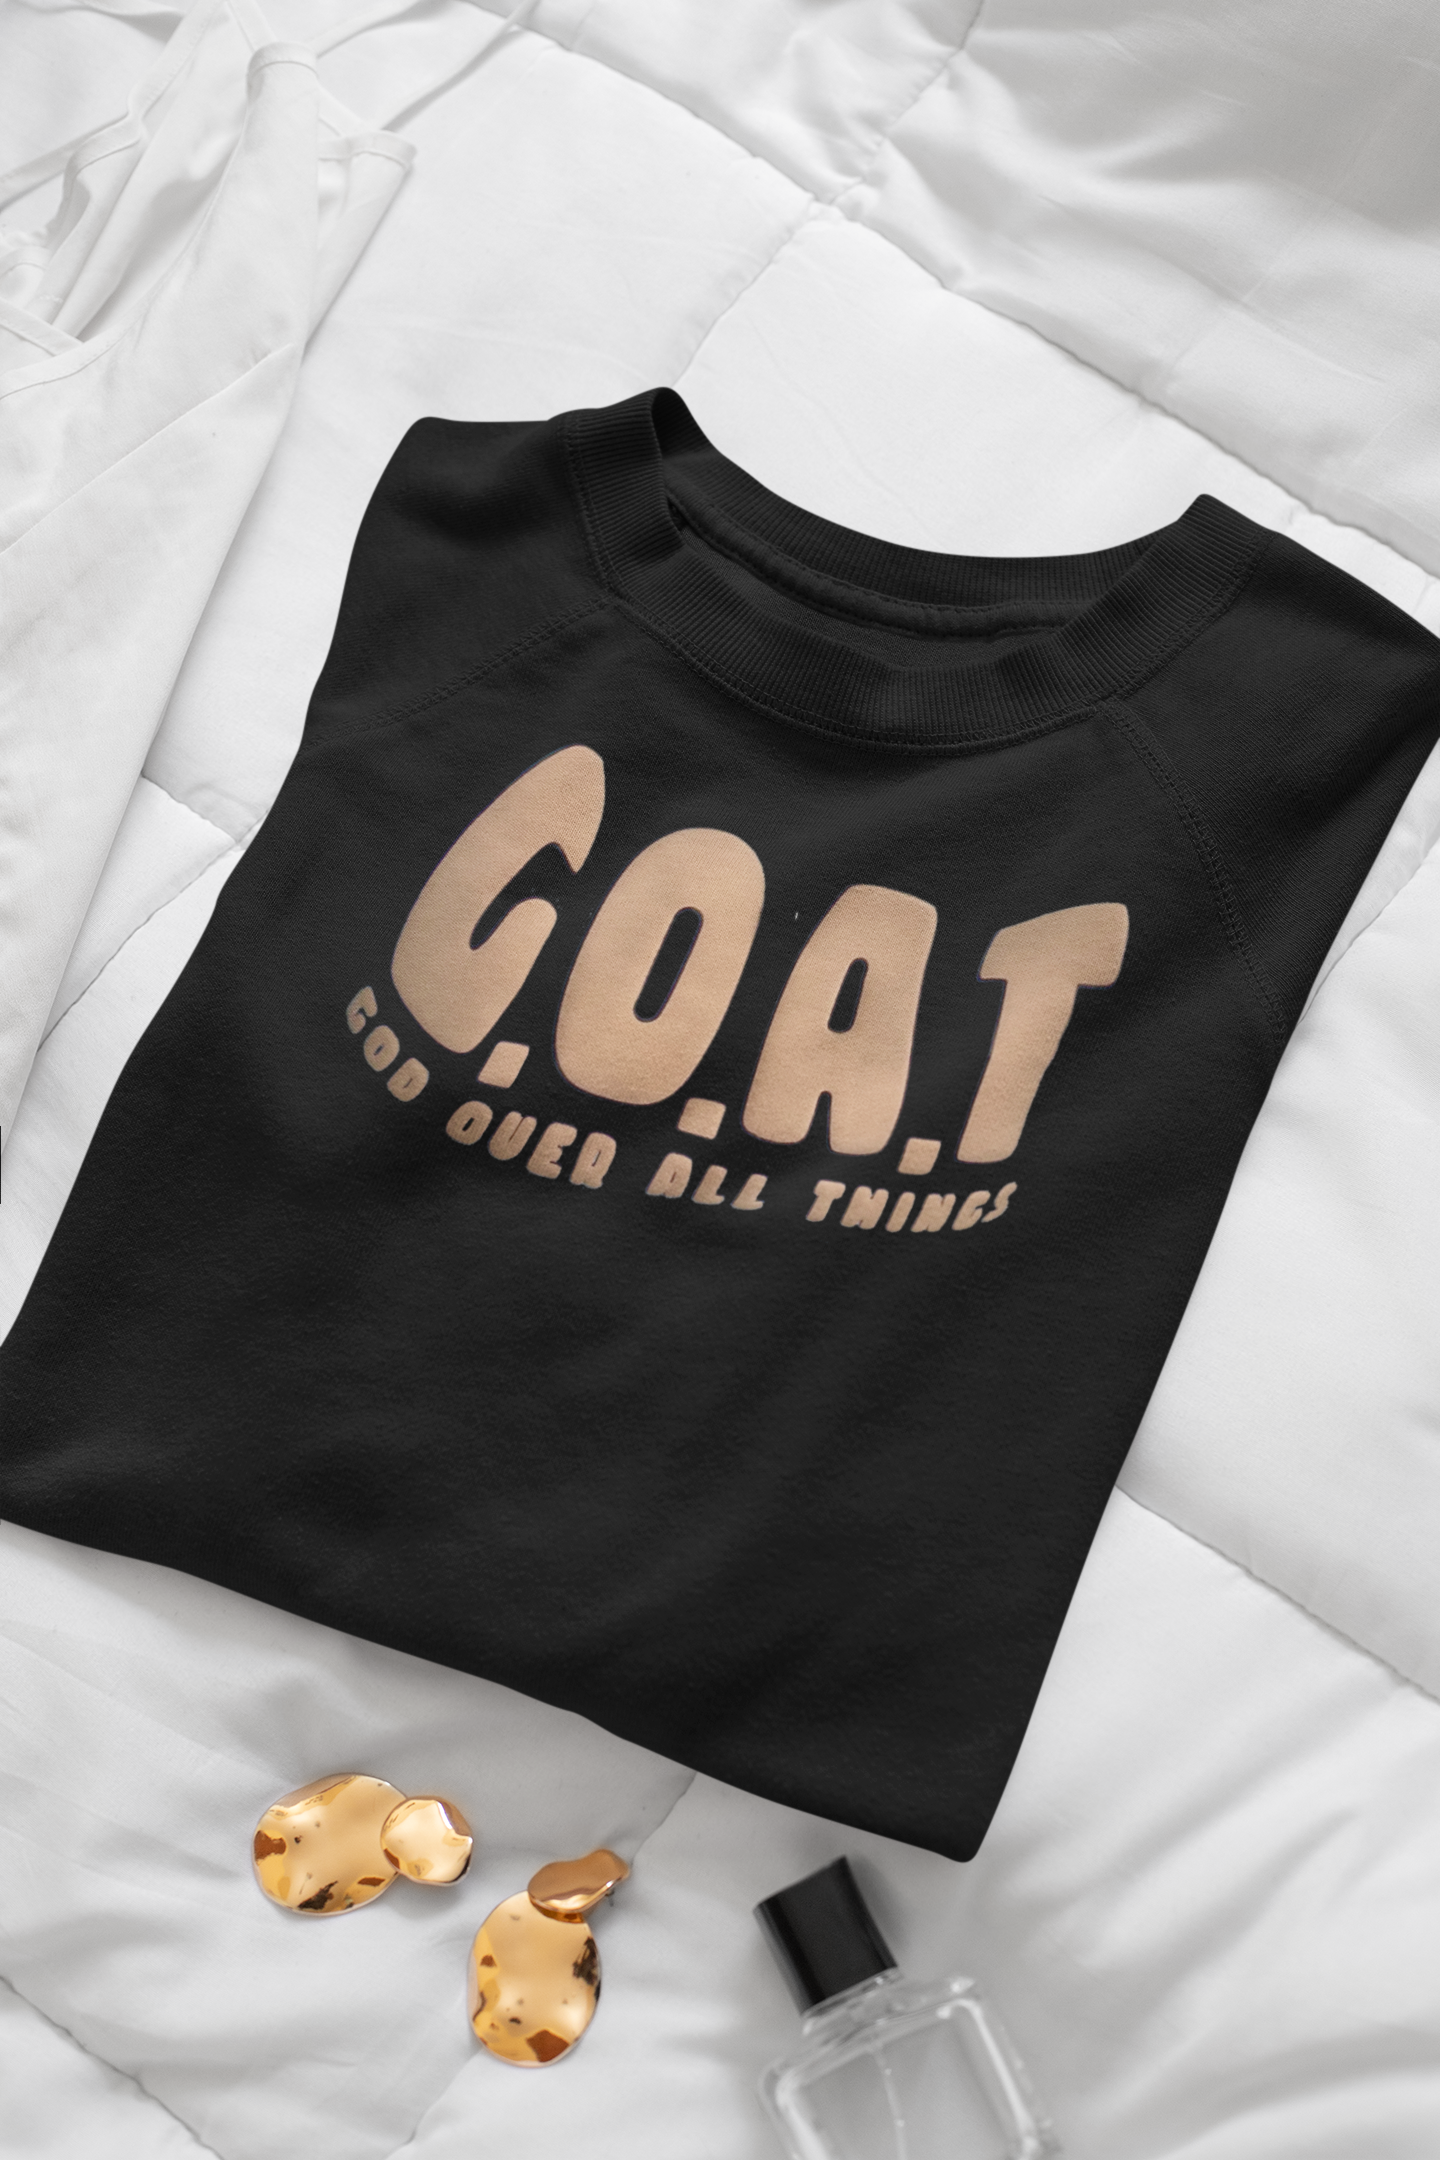 G.O.A.T - God over all things Sweater tan Puff